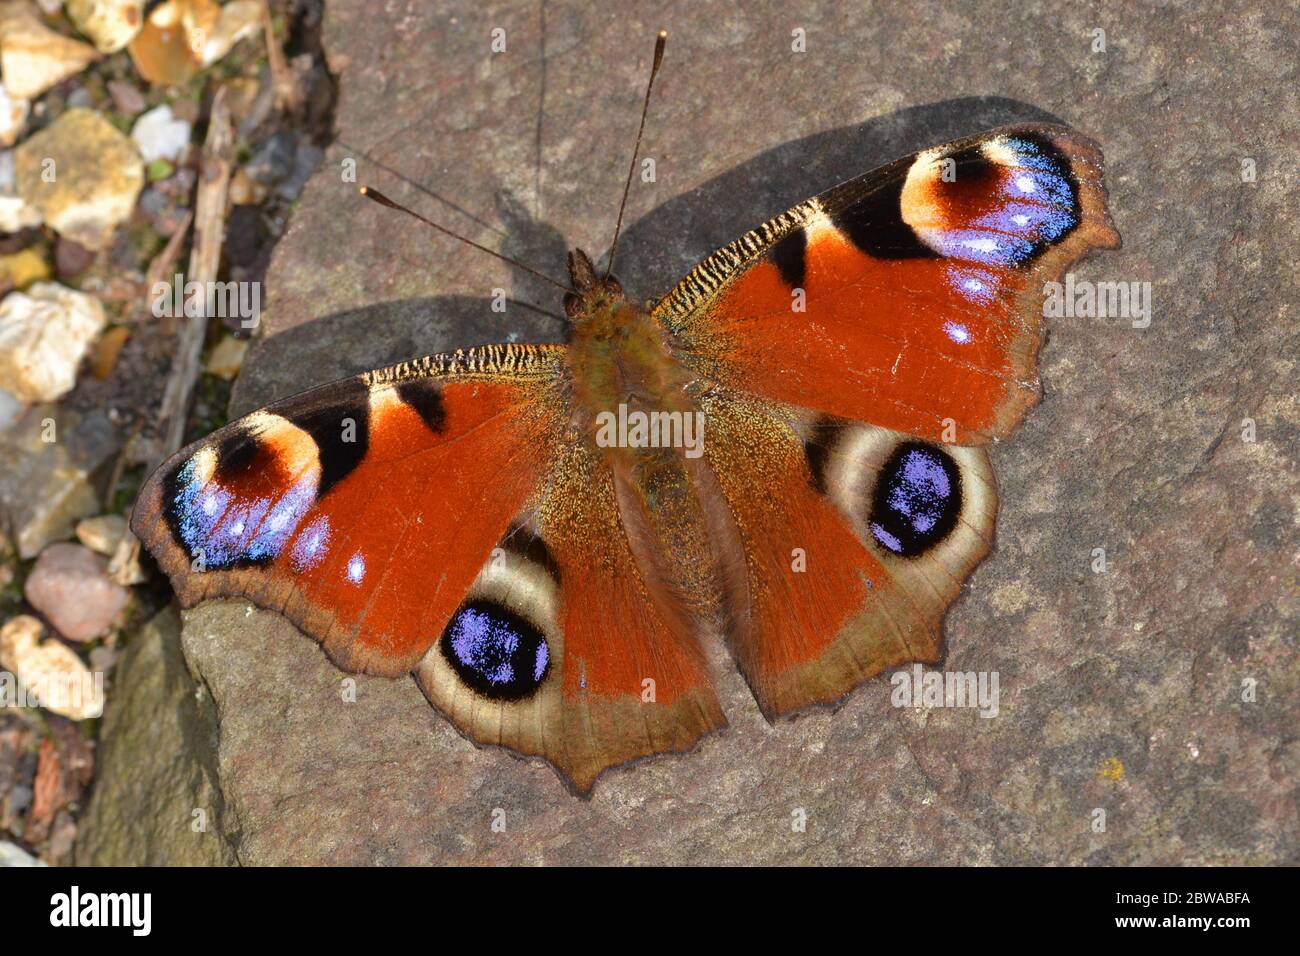 Peacock Butterfly basking on rock, England. One of the first butterflies to emerge in Spring after hibernation. Stock Photo